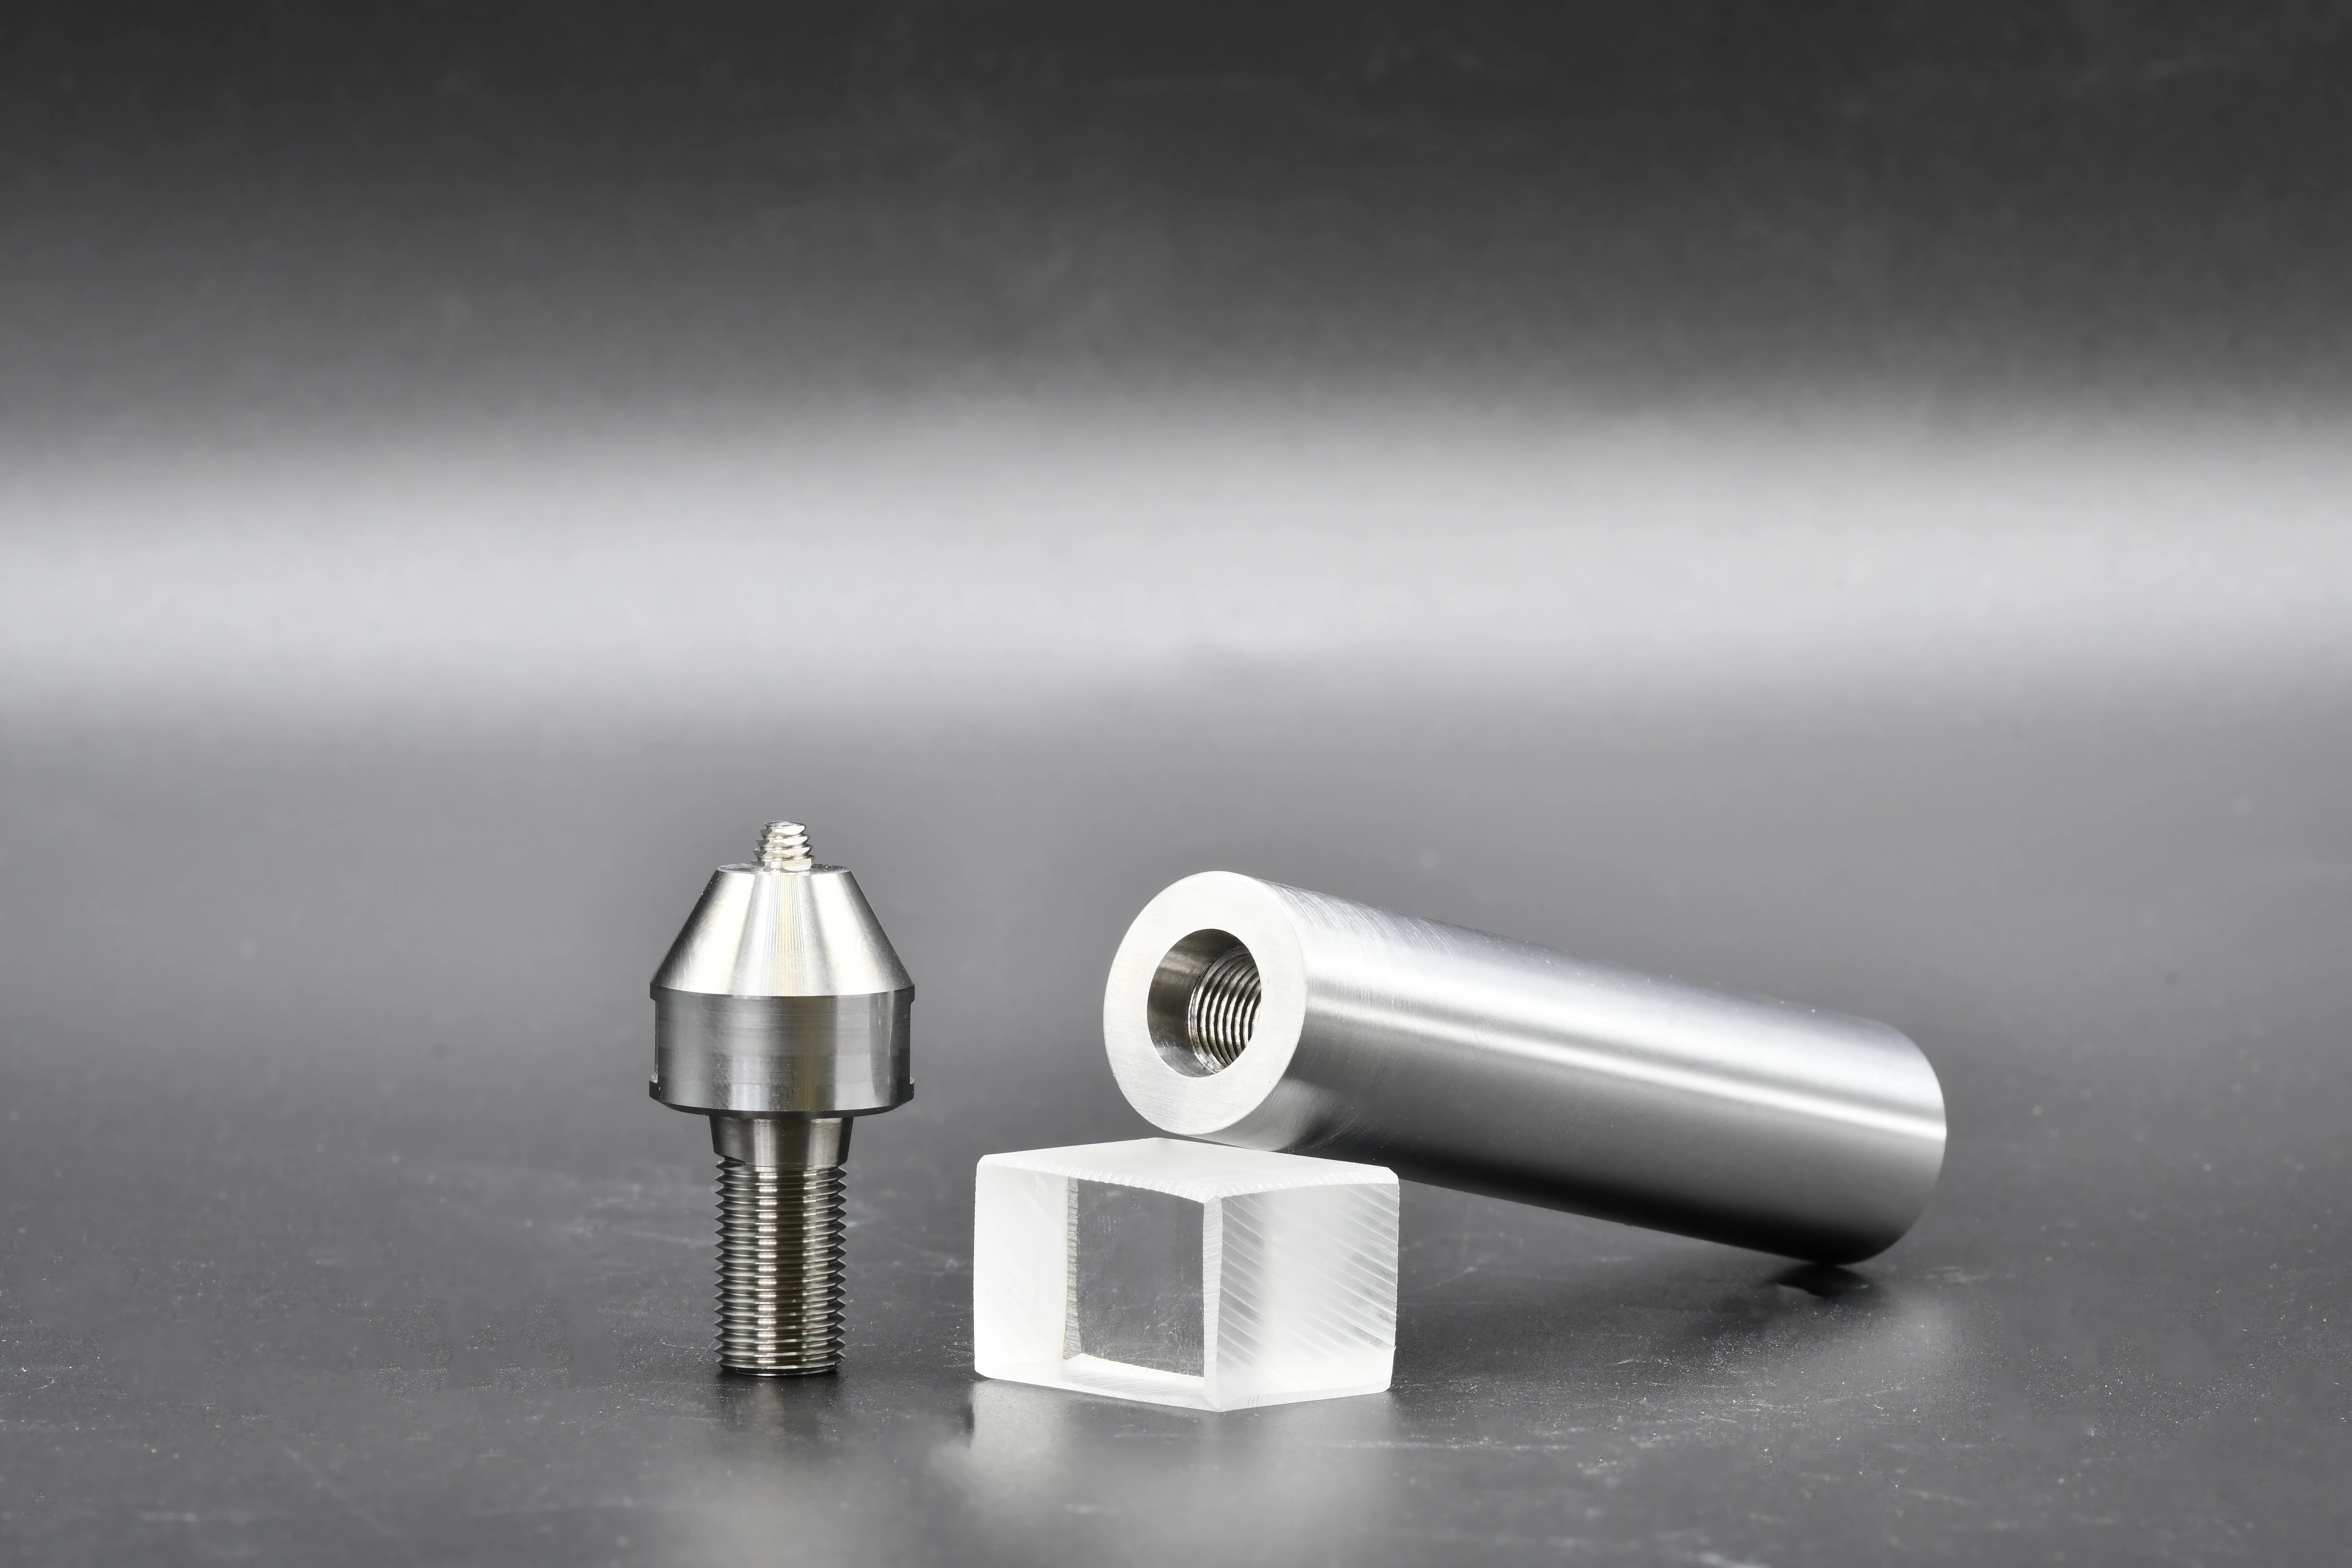 Friction stir welding tool compatible with all machine types